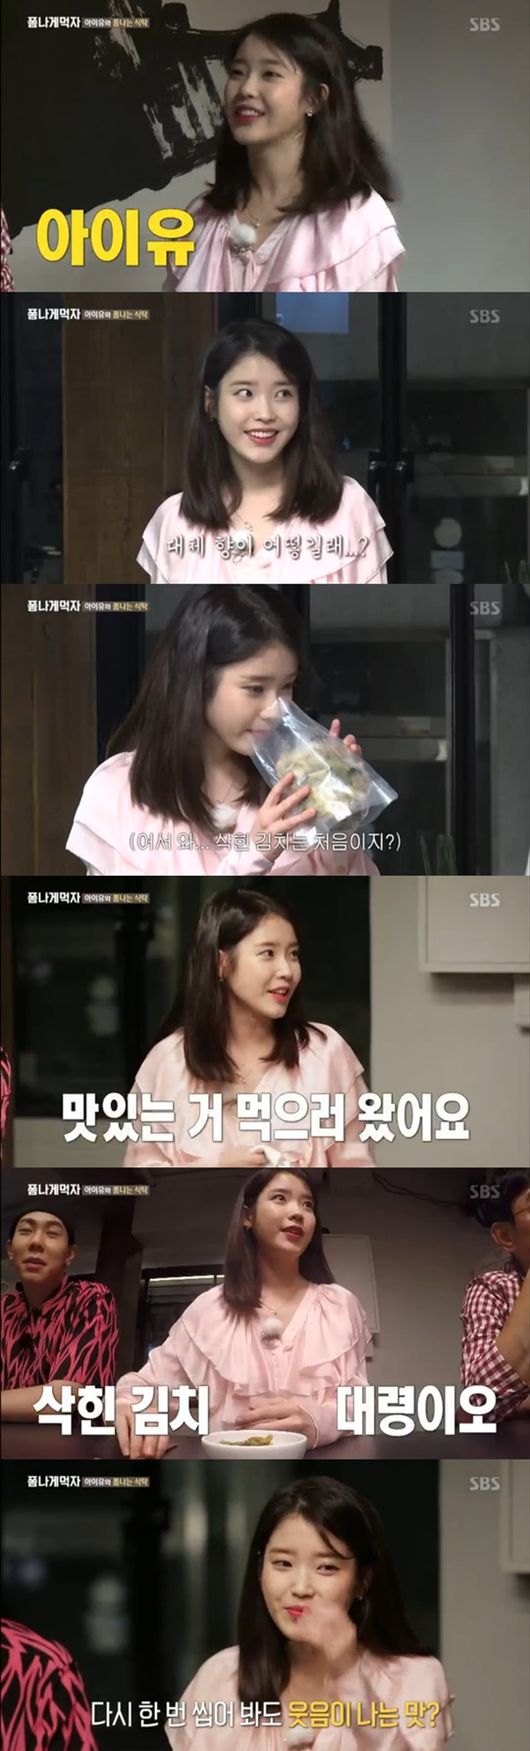 The IU appeared as the first guest of Lets Eat Pomnaga.In the SBS entertainment program Lets Eat Form, which was first broadcast on the afternoon of the 7th, the first guest IU to meet Lee Kyung-kyu, Kim Sang-joong, Chae Rim and Loko 4MC appeared.On the day, 4MC found his restaurant to taste the soaked kimchi that chef Lee Won Il would change; there was already the first guest, singer IU, waiting for them.Lee Kyung-kyu was pleased to see the IU, and Kim Sang-joong was surprised to see him, saying, Its IU.The producers invited me, I just came here to eat delicious food, the IU said in Lee Kyung-kyus words.The IU responded with a cool response, saying that 4MCs smelled the fresh kimchi they had already tasted and smells like new kimchi. Lee Won Il, who shook his body, was embarrassed by the IUs cool response.Lee Won Il recognized the shredded kimchi at a glance and recalled, When I learned food from my mother and grandmother, I accidentally met the shredded kimchi. I remember the smell was intense.IU saw the original taste of the cut kimchi cut by Lee Won Il and said, I was worried about the cut, but it is a new kimchi feeling that is not more tasty than the new kimchi.I thought it would be a big bump because it was cut, but it is very crisp. Lets eat it. Capture the broadcast.